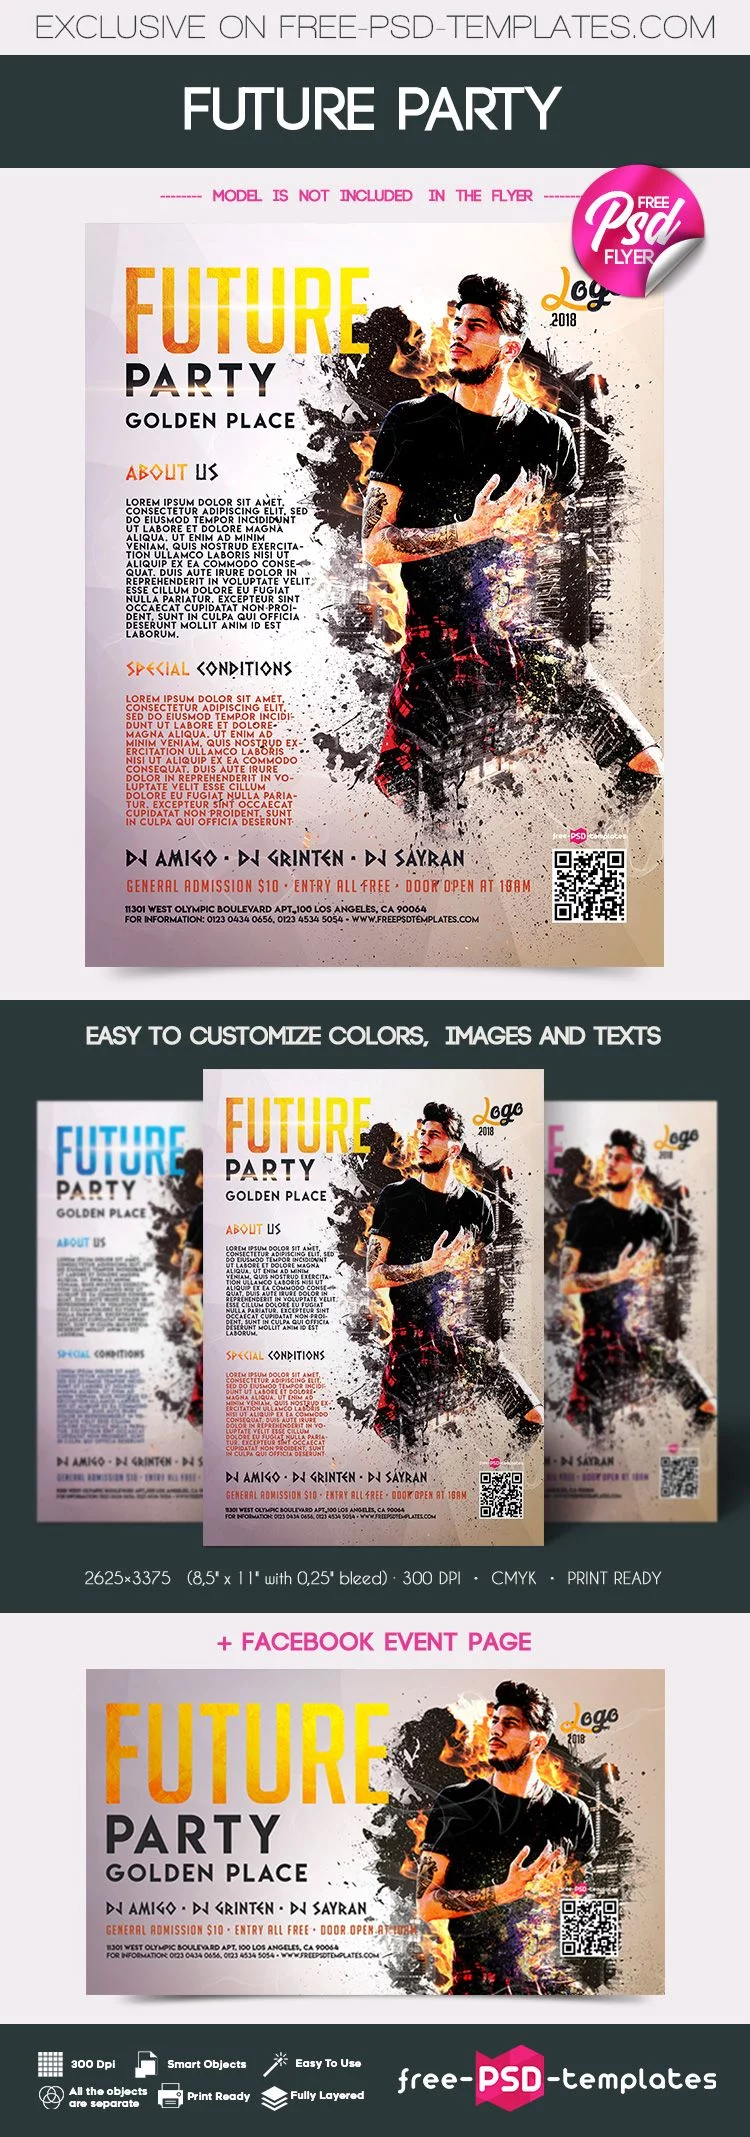 Free Future Party Flyer in PSD